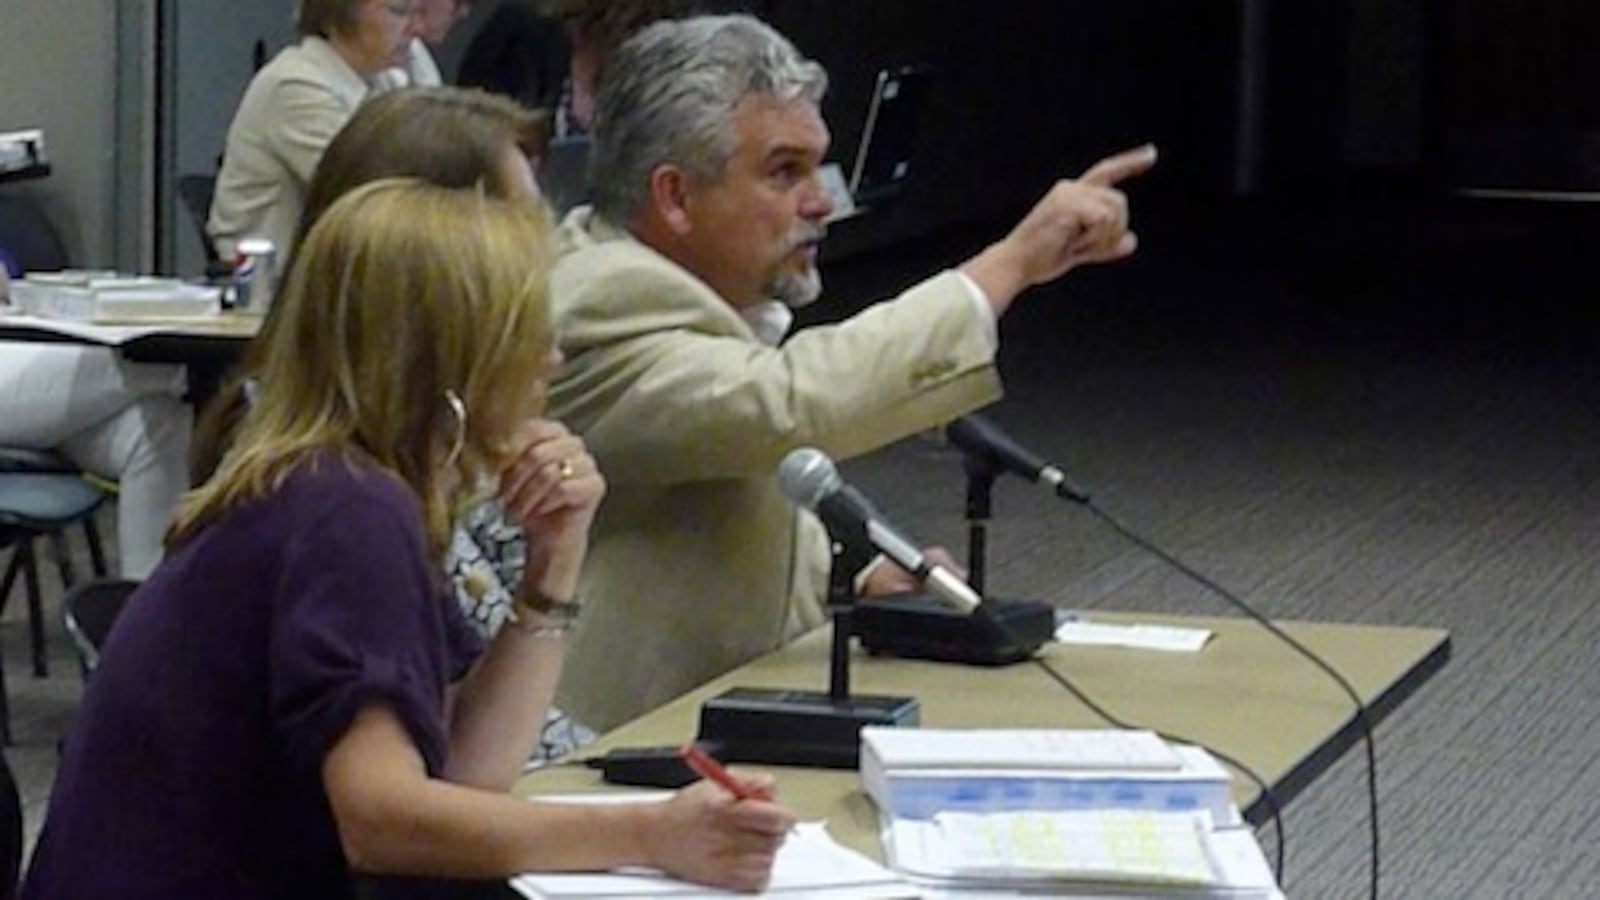 Sheridan Superintendent Michael Clough makes a point during construction board hearing on June 27, 2012.